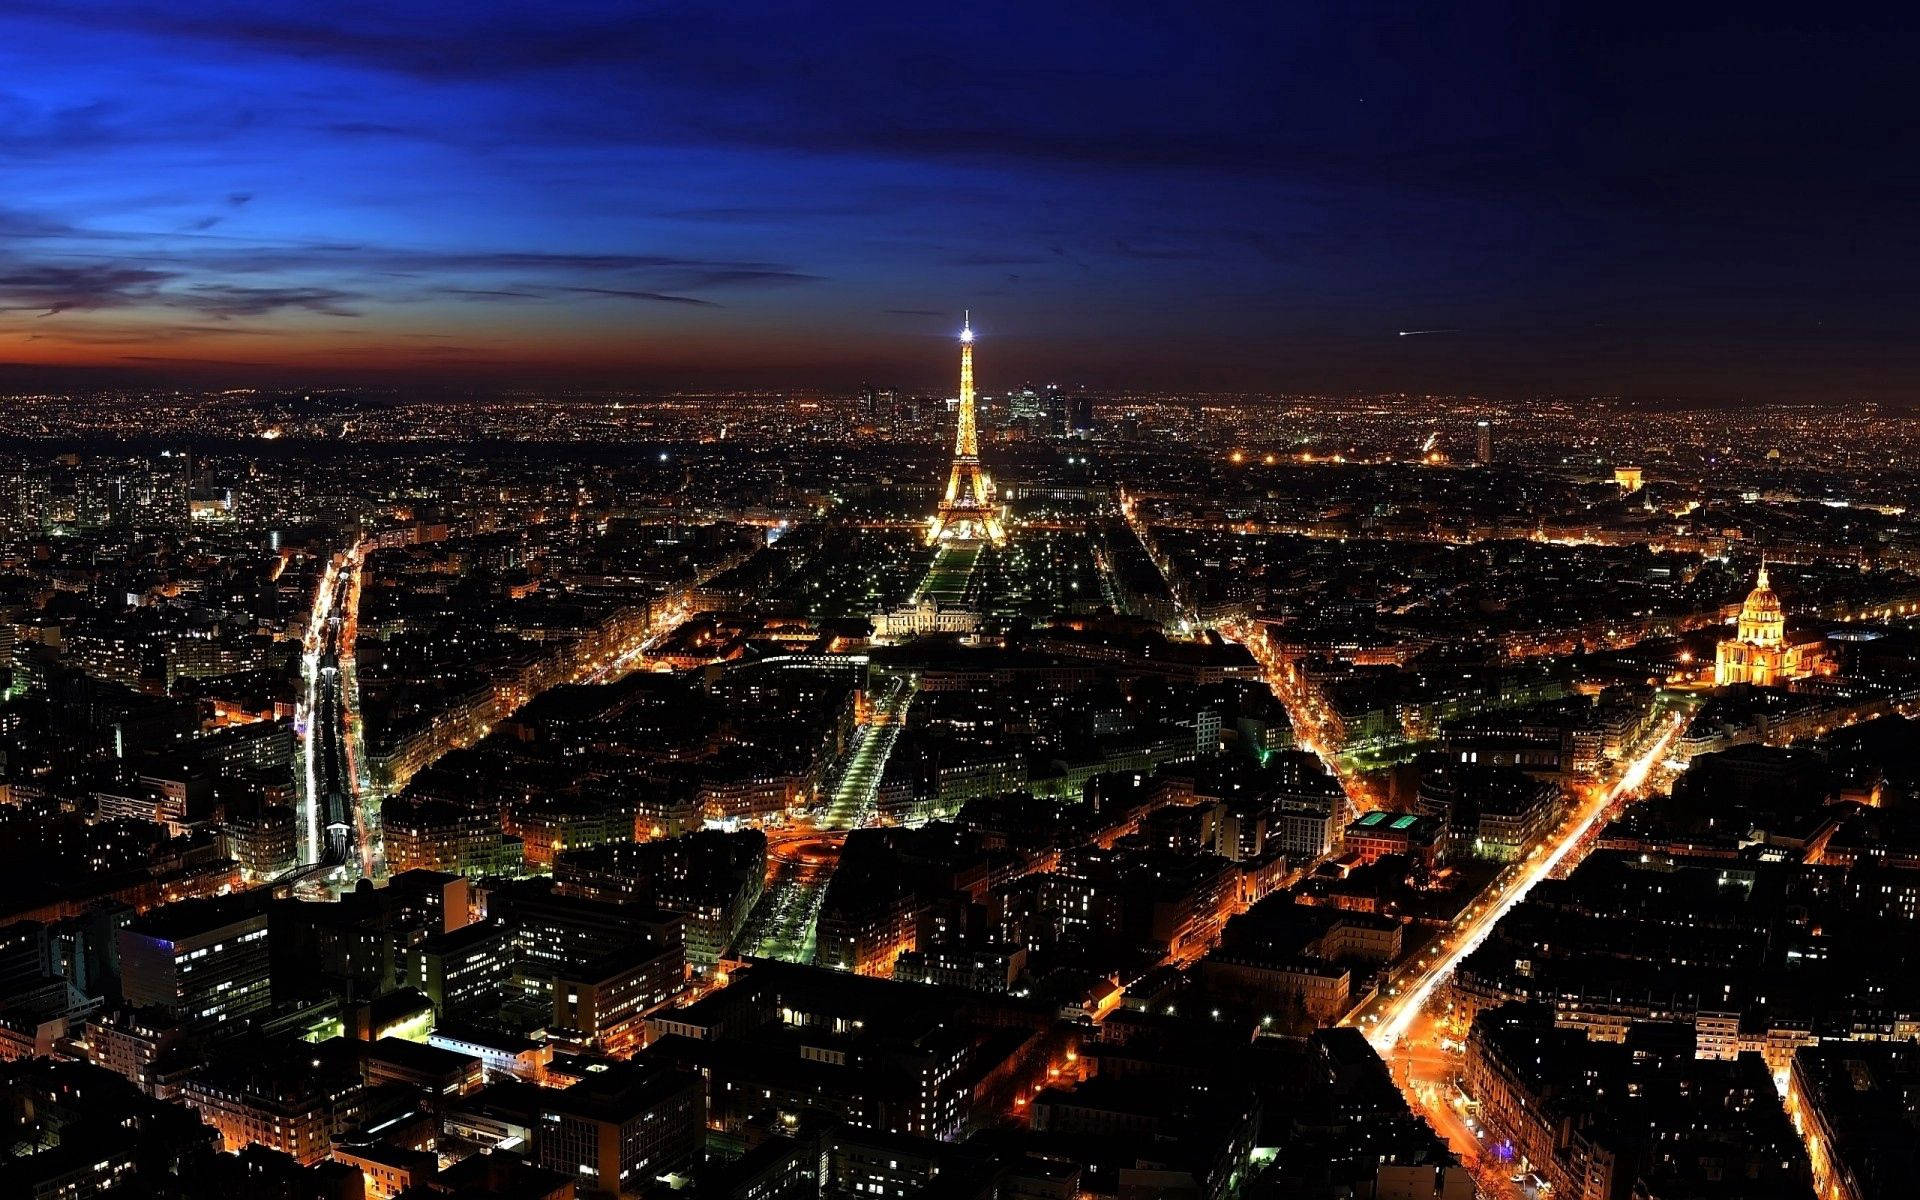 “A Nighttime View Of The City Of Lights” Wallpaper